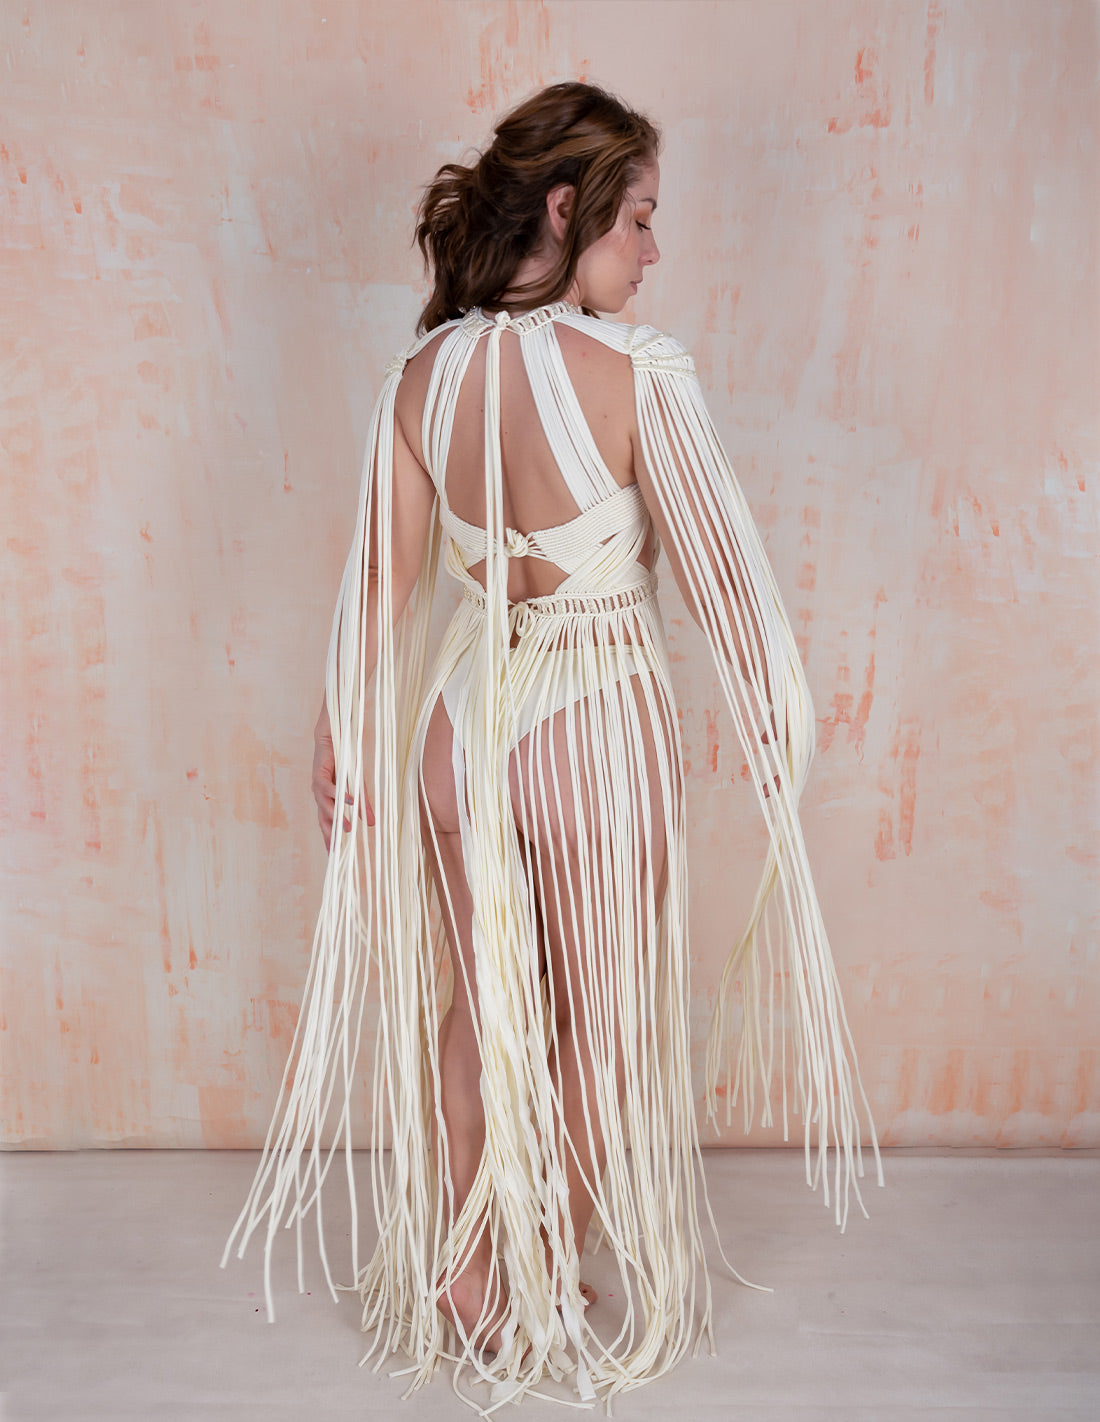 Cadere Glow Dress Ivory. Dress With Hand Woven Macramé In Ivory. Entreaguas